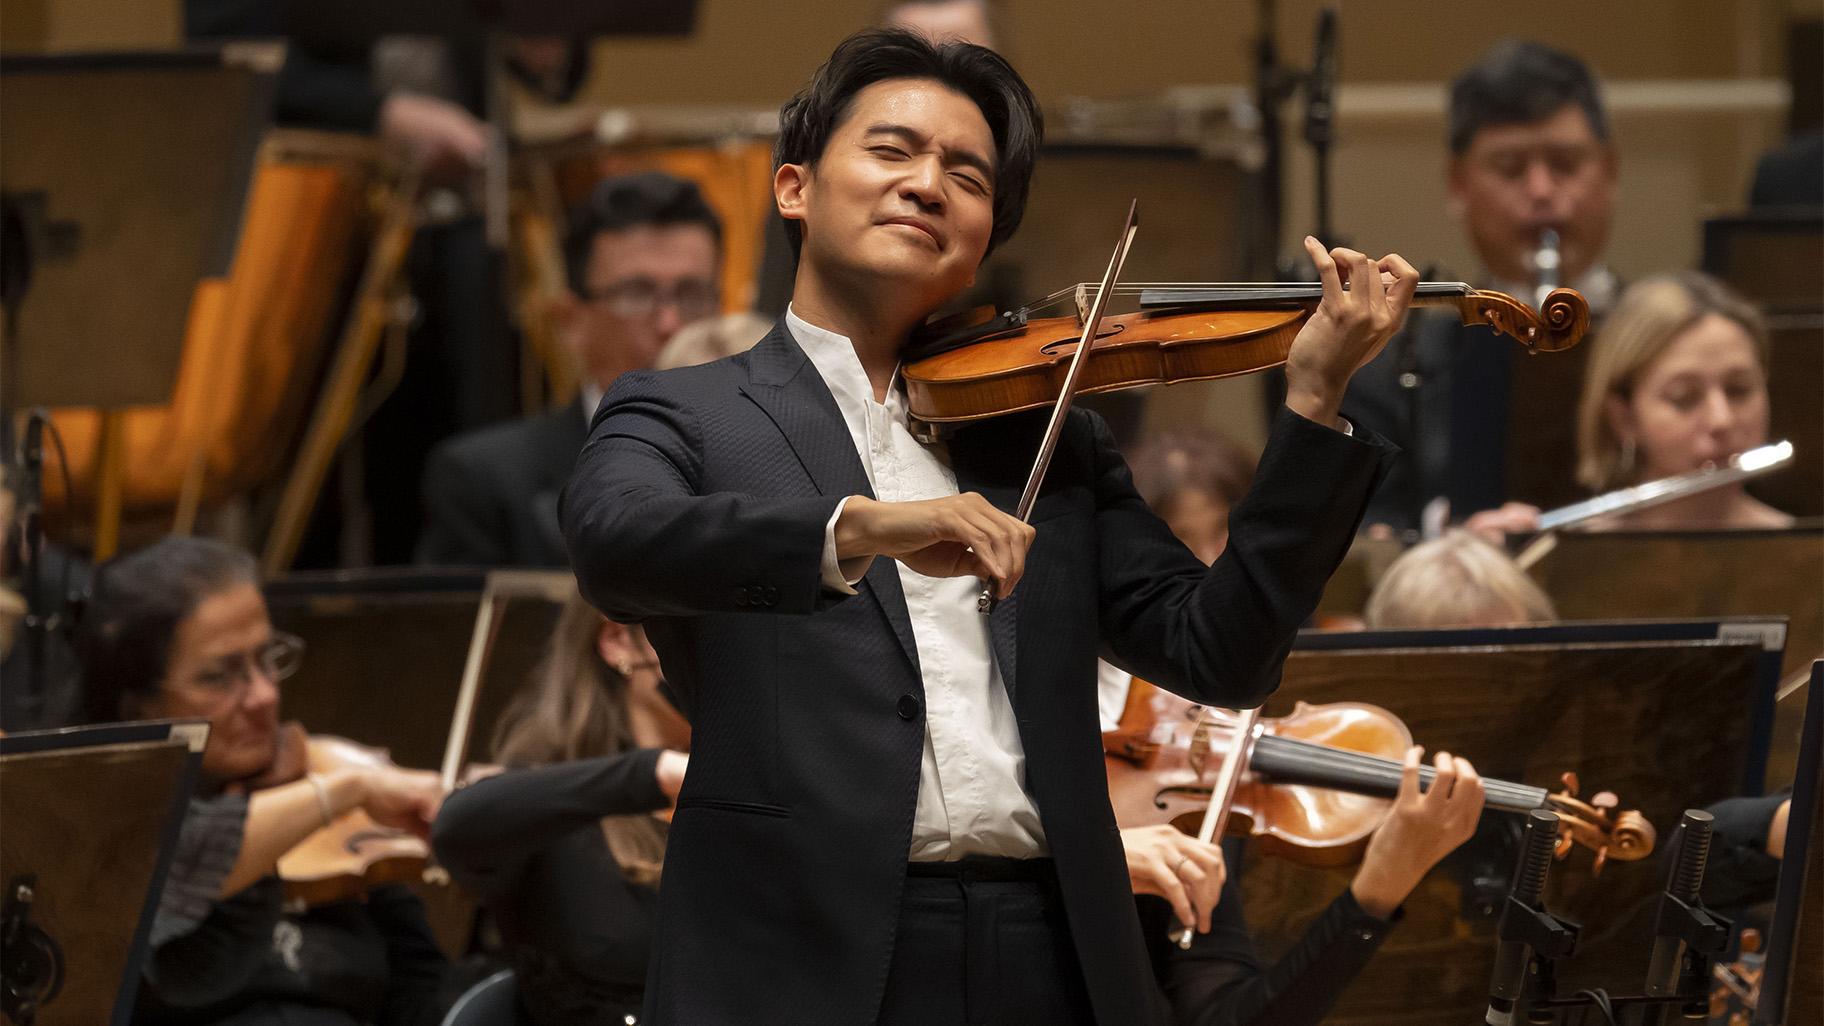 Soloist Ray Chen performs Lalo’s Symphonie espagnole with the Chicago Symphony Orchestra. (Credit: Todd Rosenberg Photography)